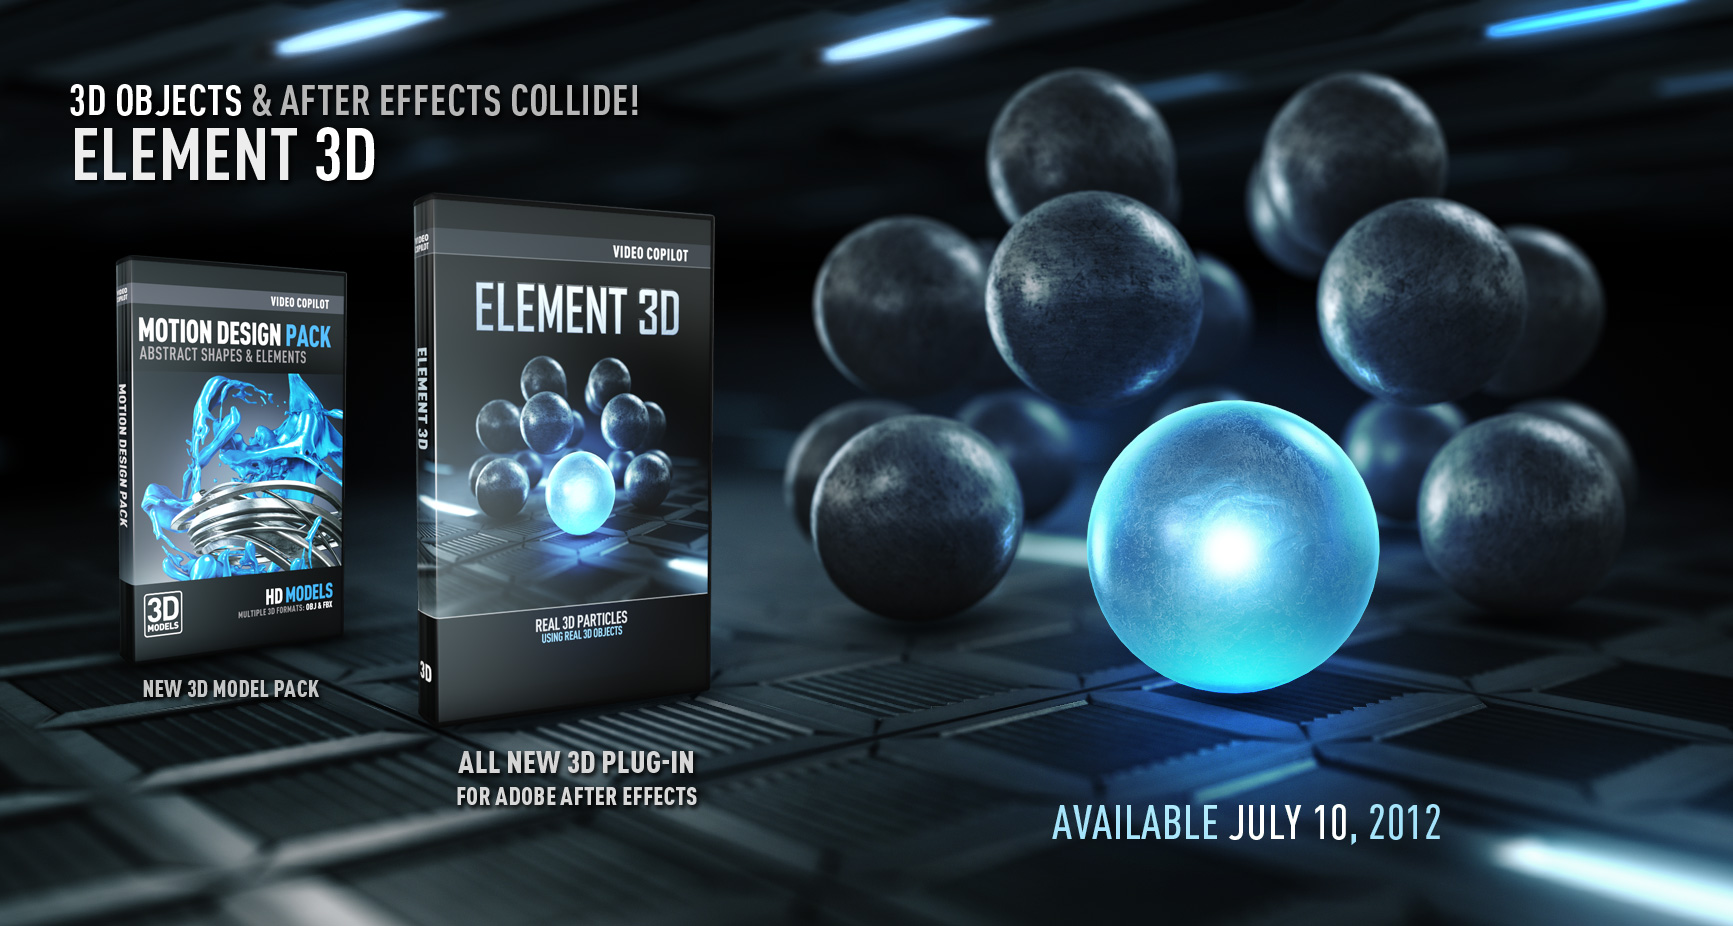 After effects free download full